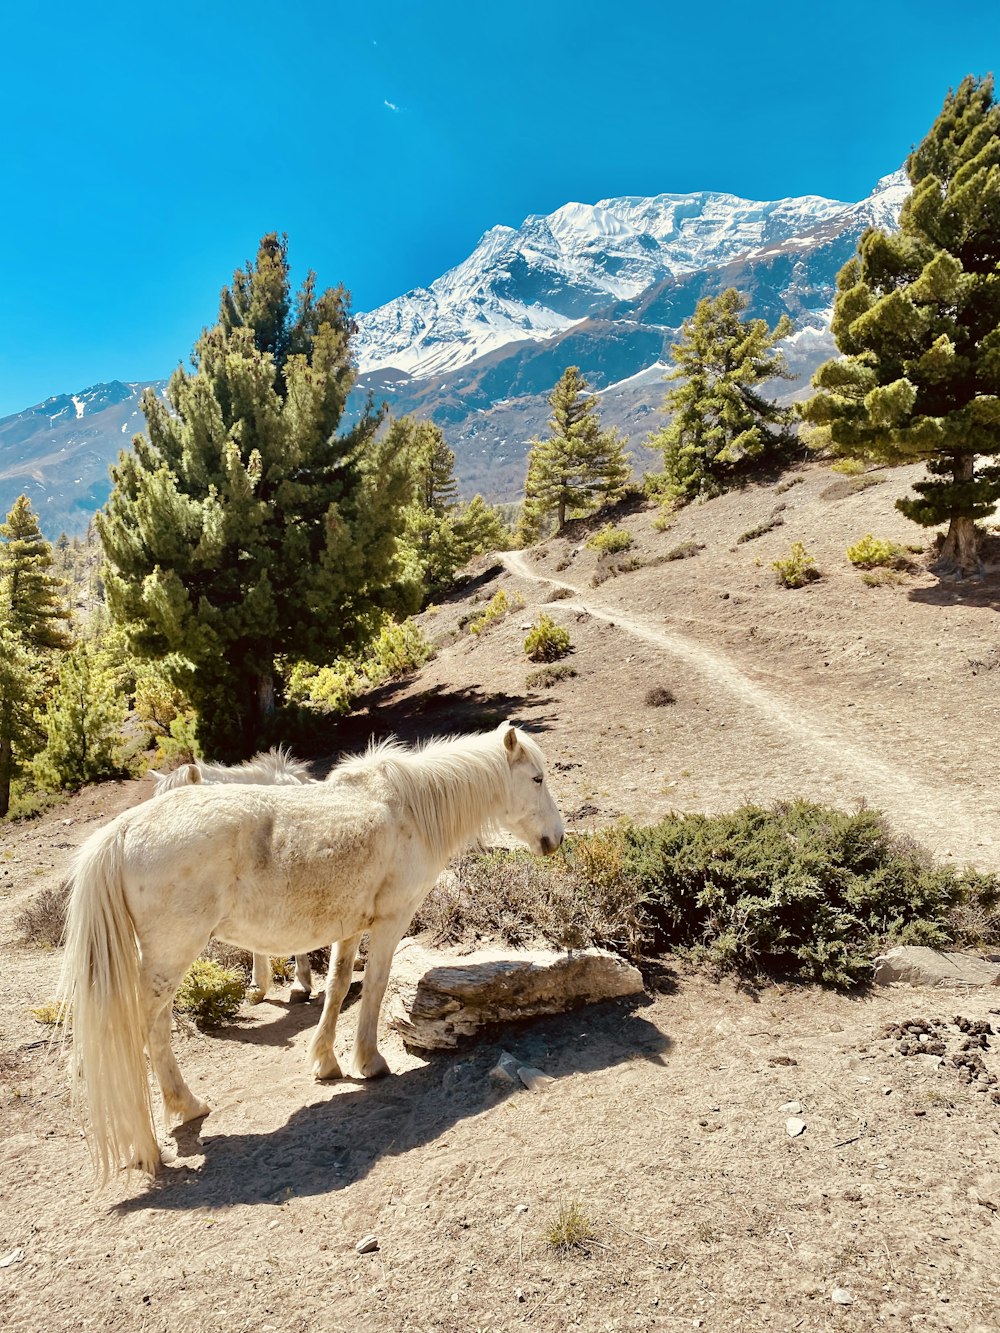 a white horse standing on a rocky hillside with trees and mountains in the background